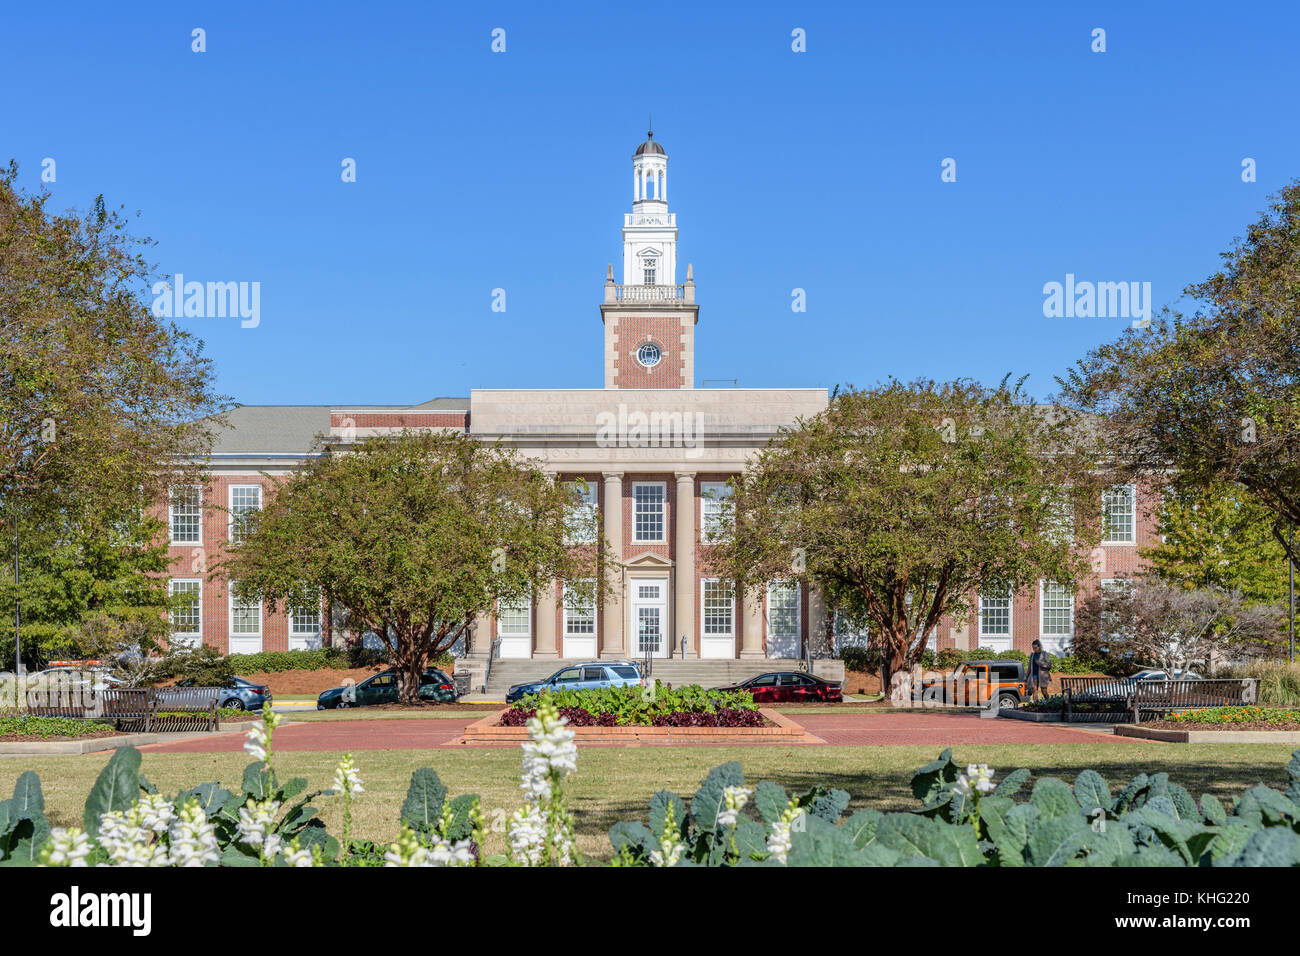 Ross Chemical Laboratory building on the campus of Auburn University, an American university / college in Auburn Alabama, USA. Stock Photo